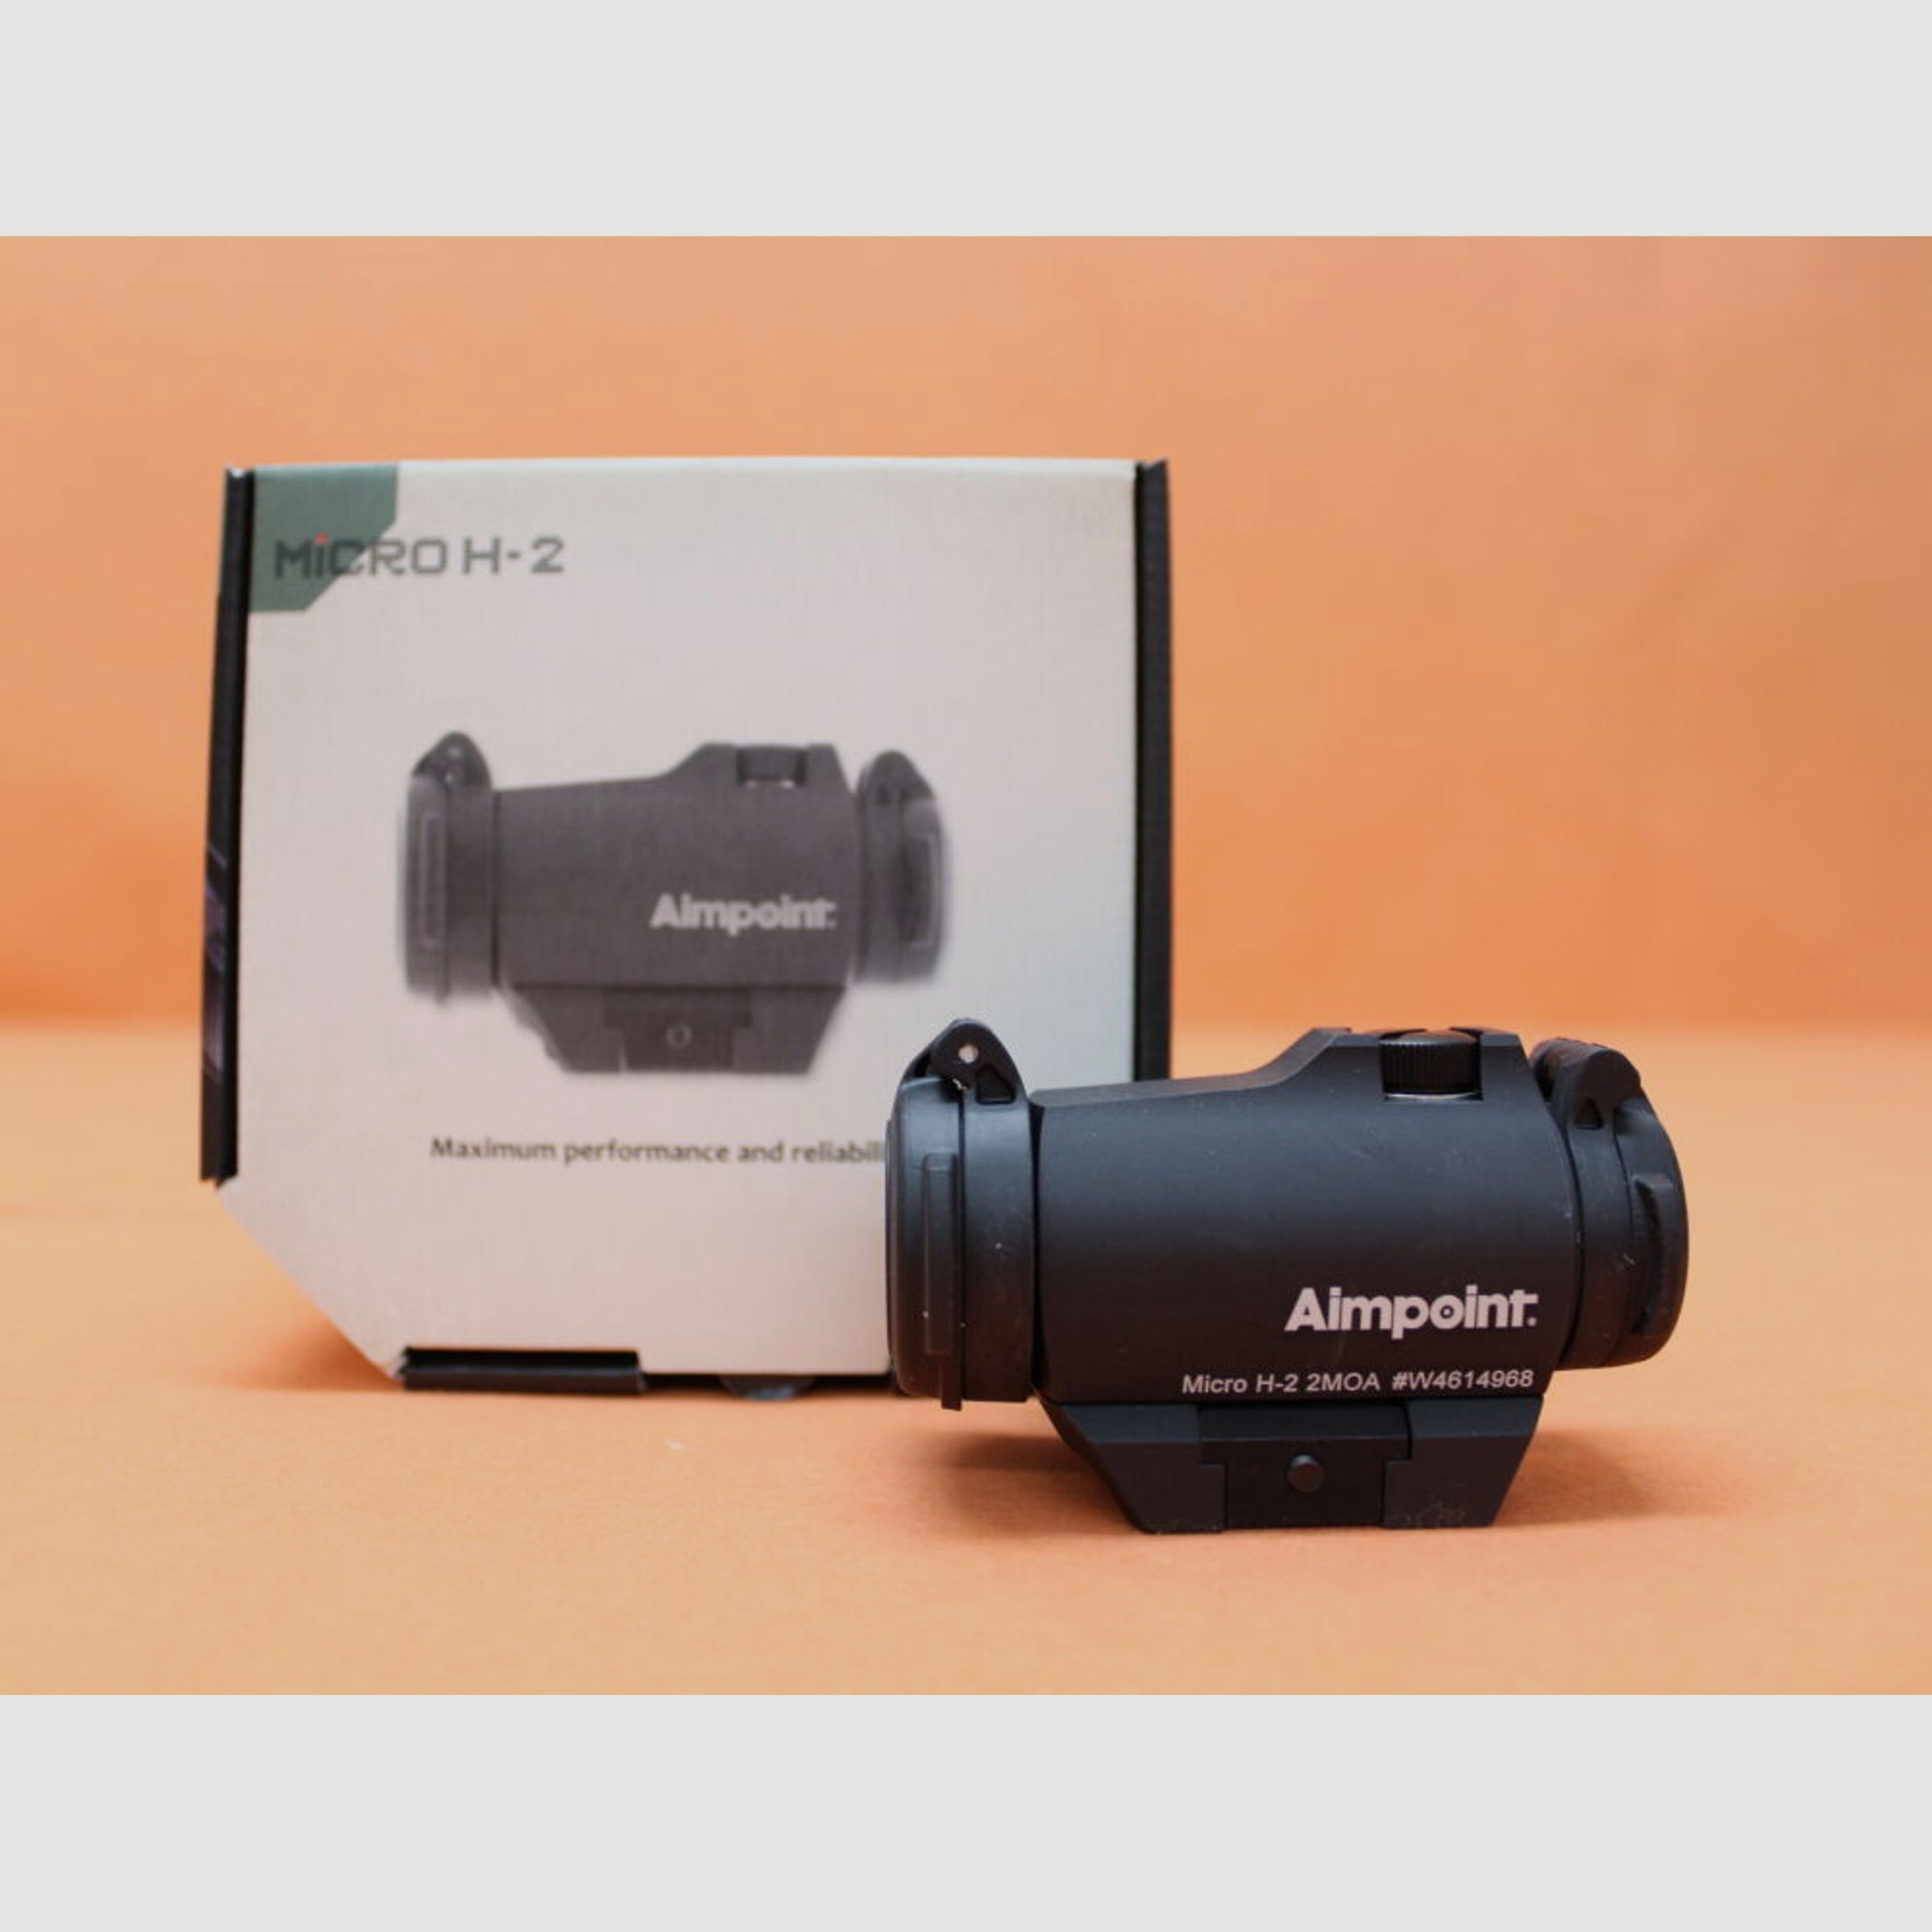 Aimpoint	 Aimpoint Micro H-2 (200185) Leuchtpunktvisier 2MOA Dot (6cm auf 100m) Montageplatte Weaver/Picatinny